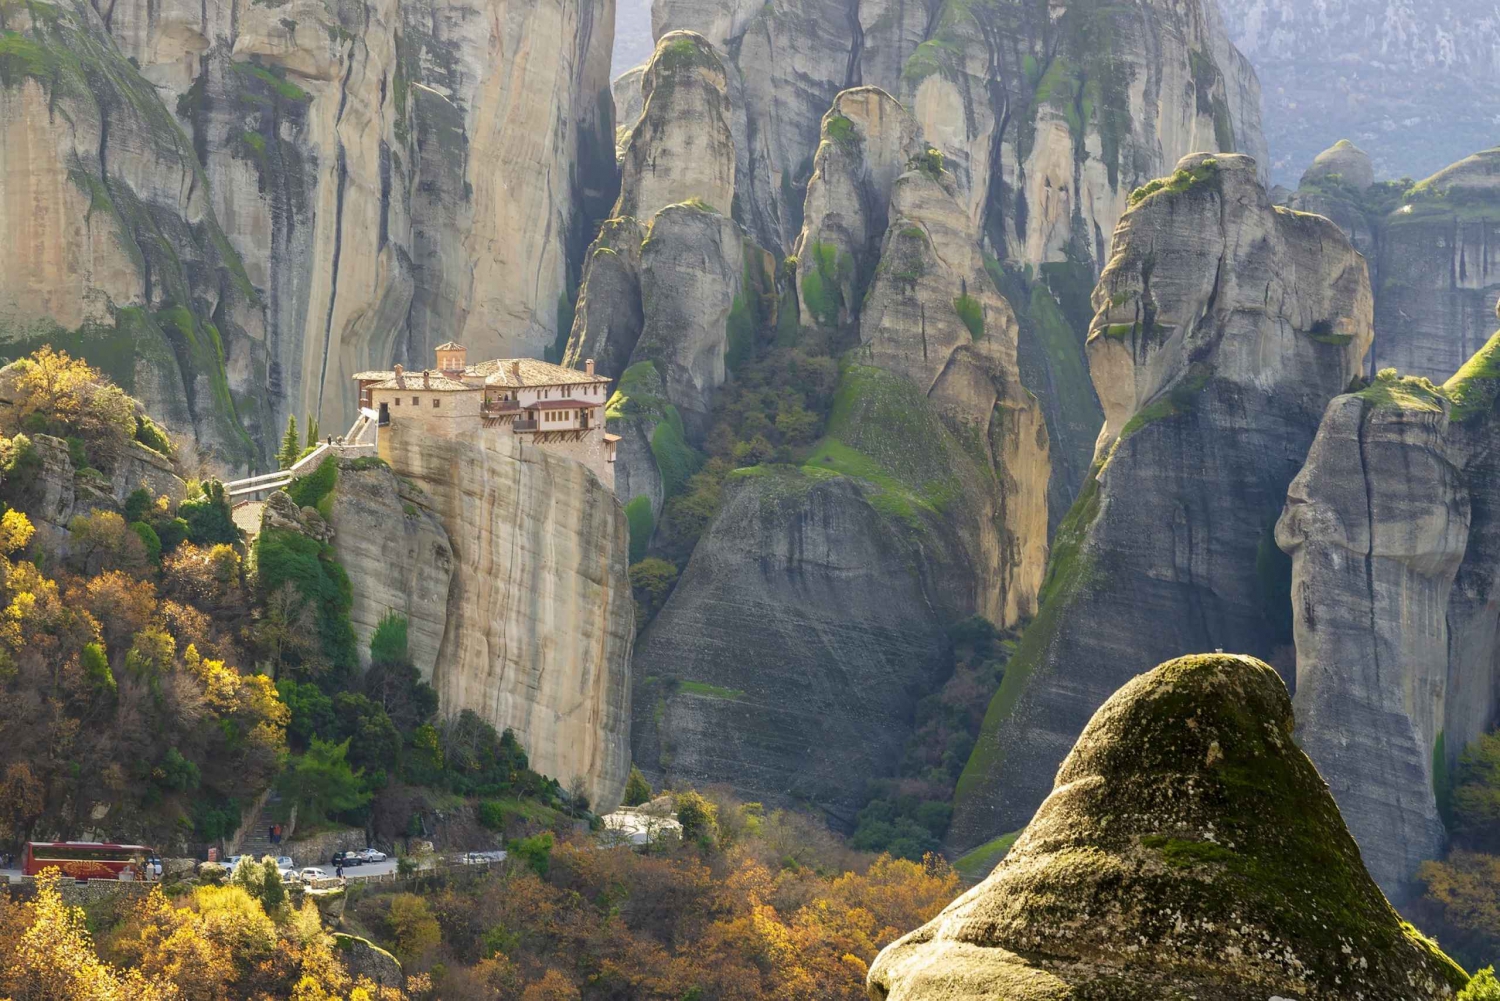 From Athens: one day tour to Meteora by bus